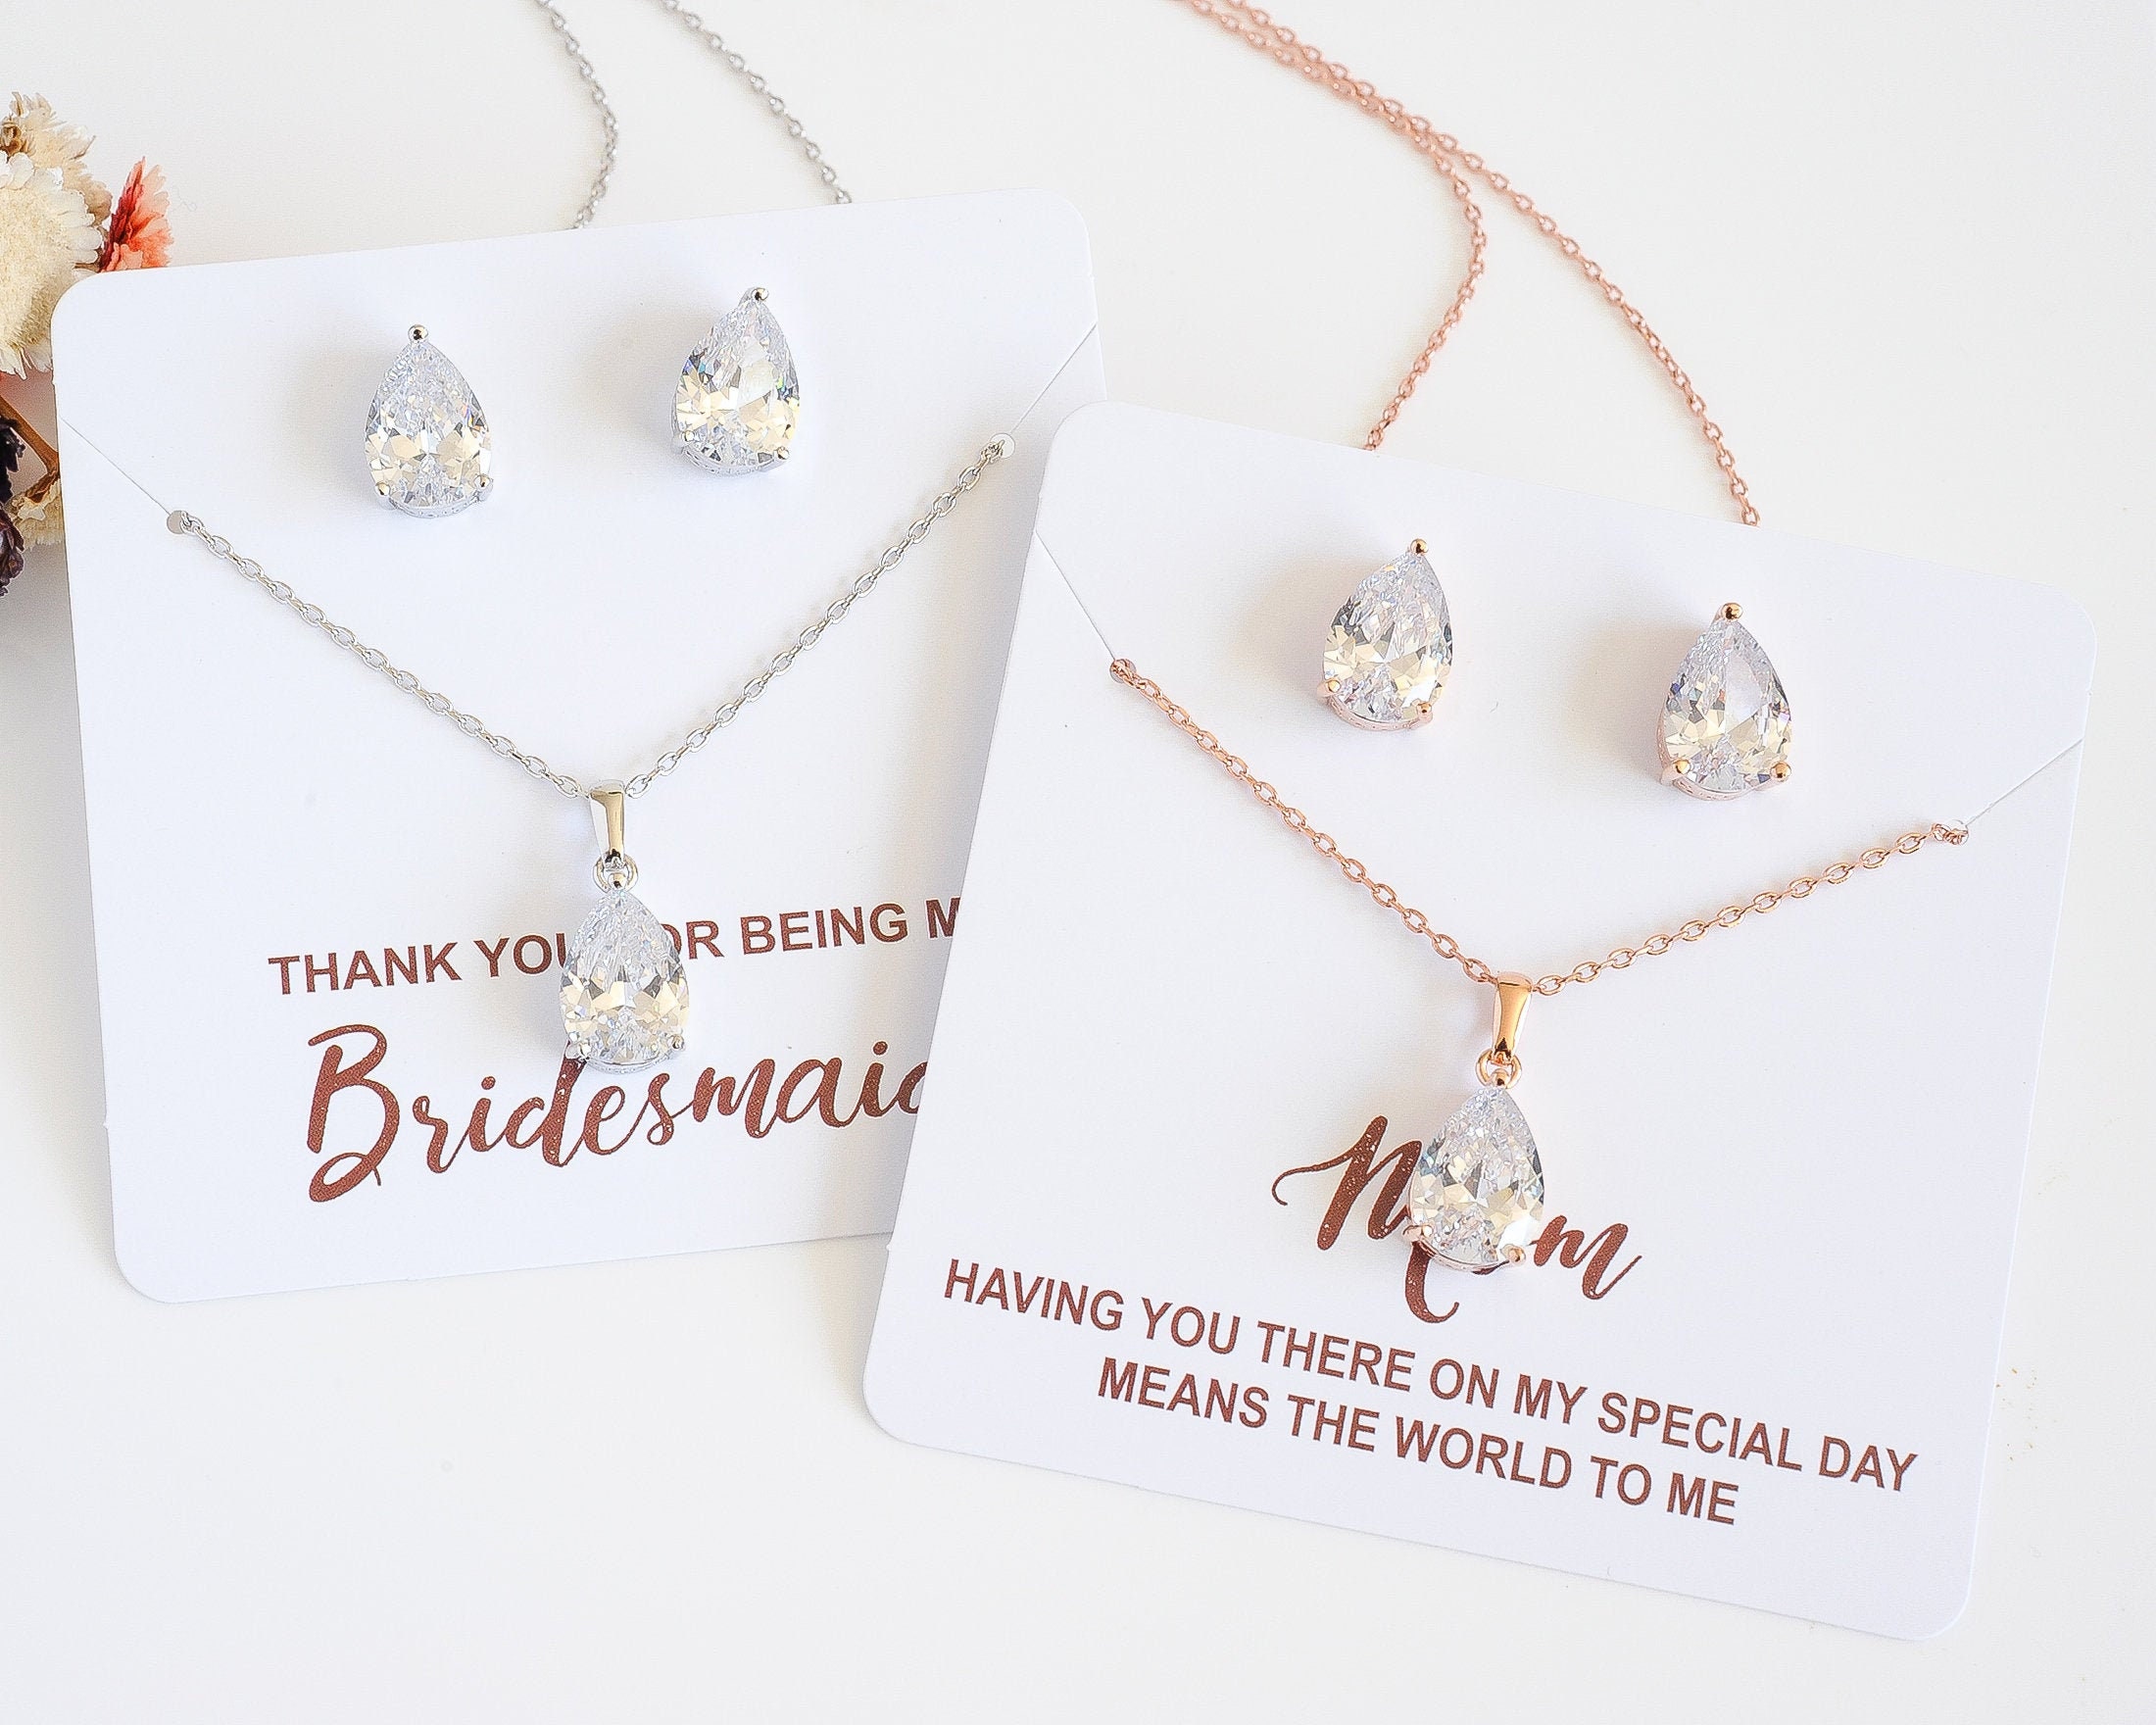 Swarovski Crystal Bridesmaid Necklace and Earrings Gift Set in Rainbow